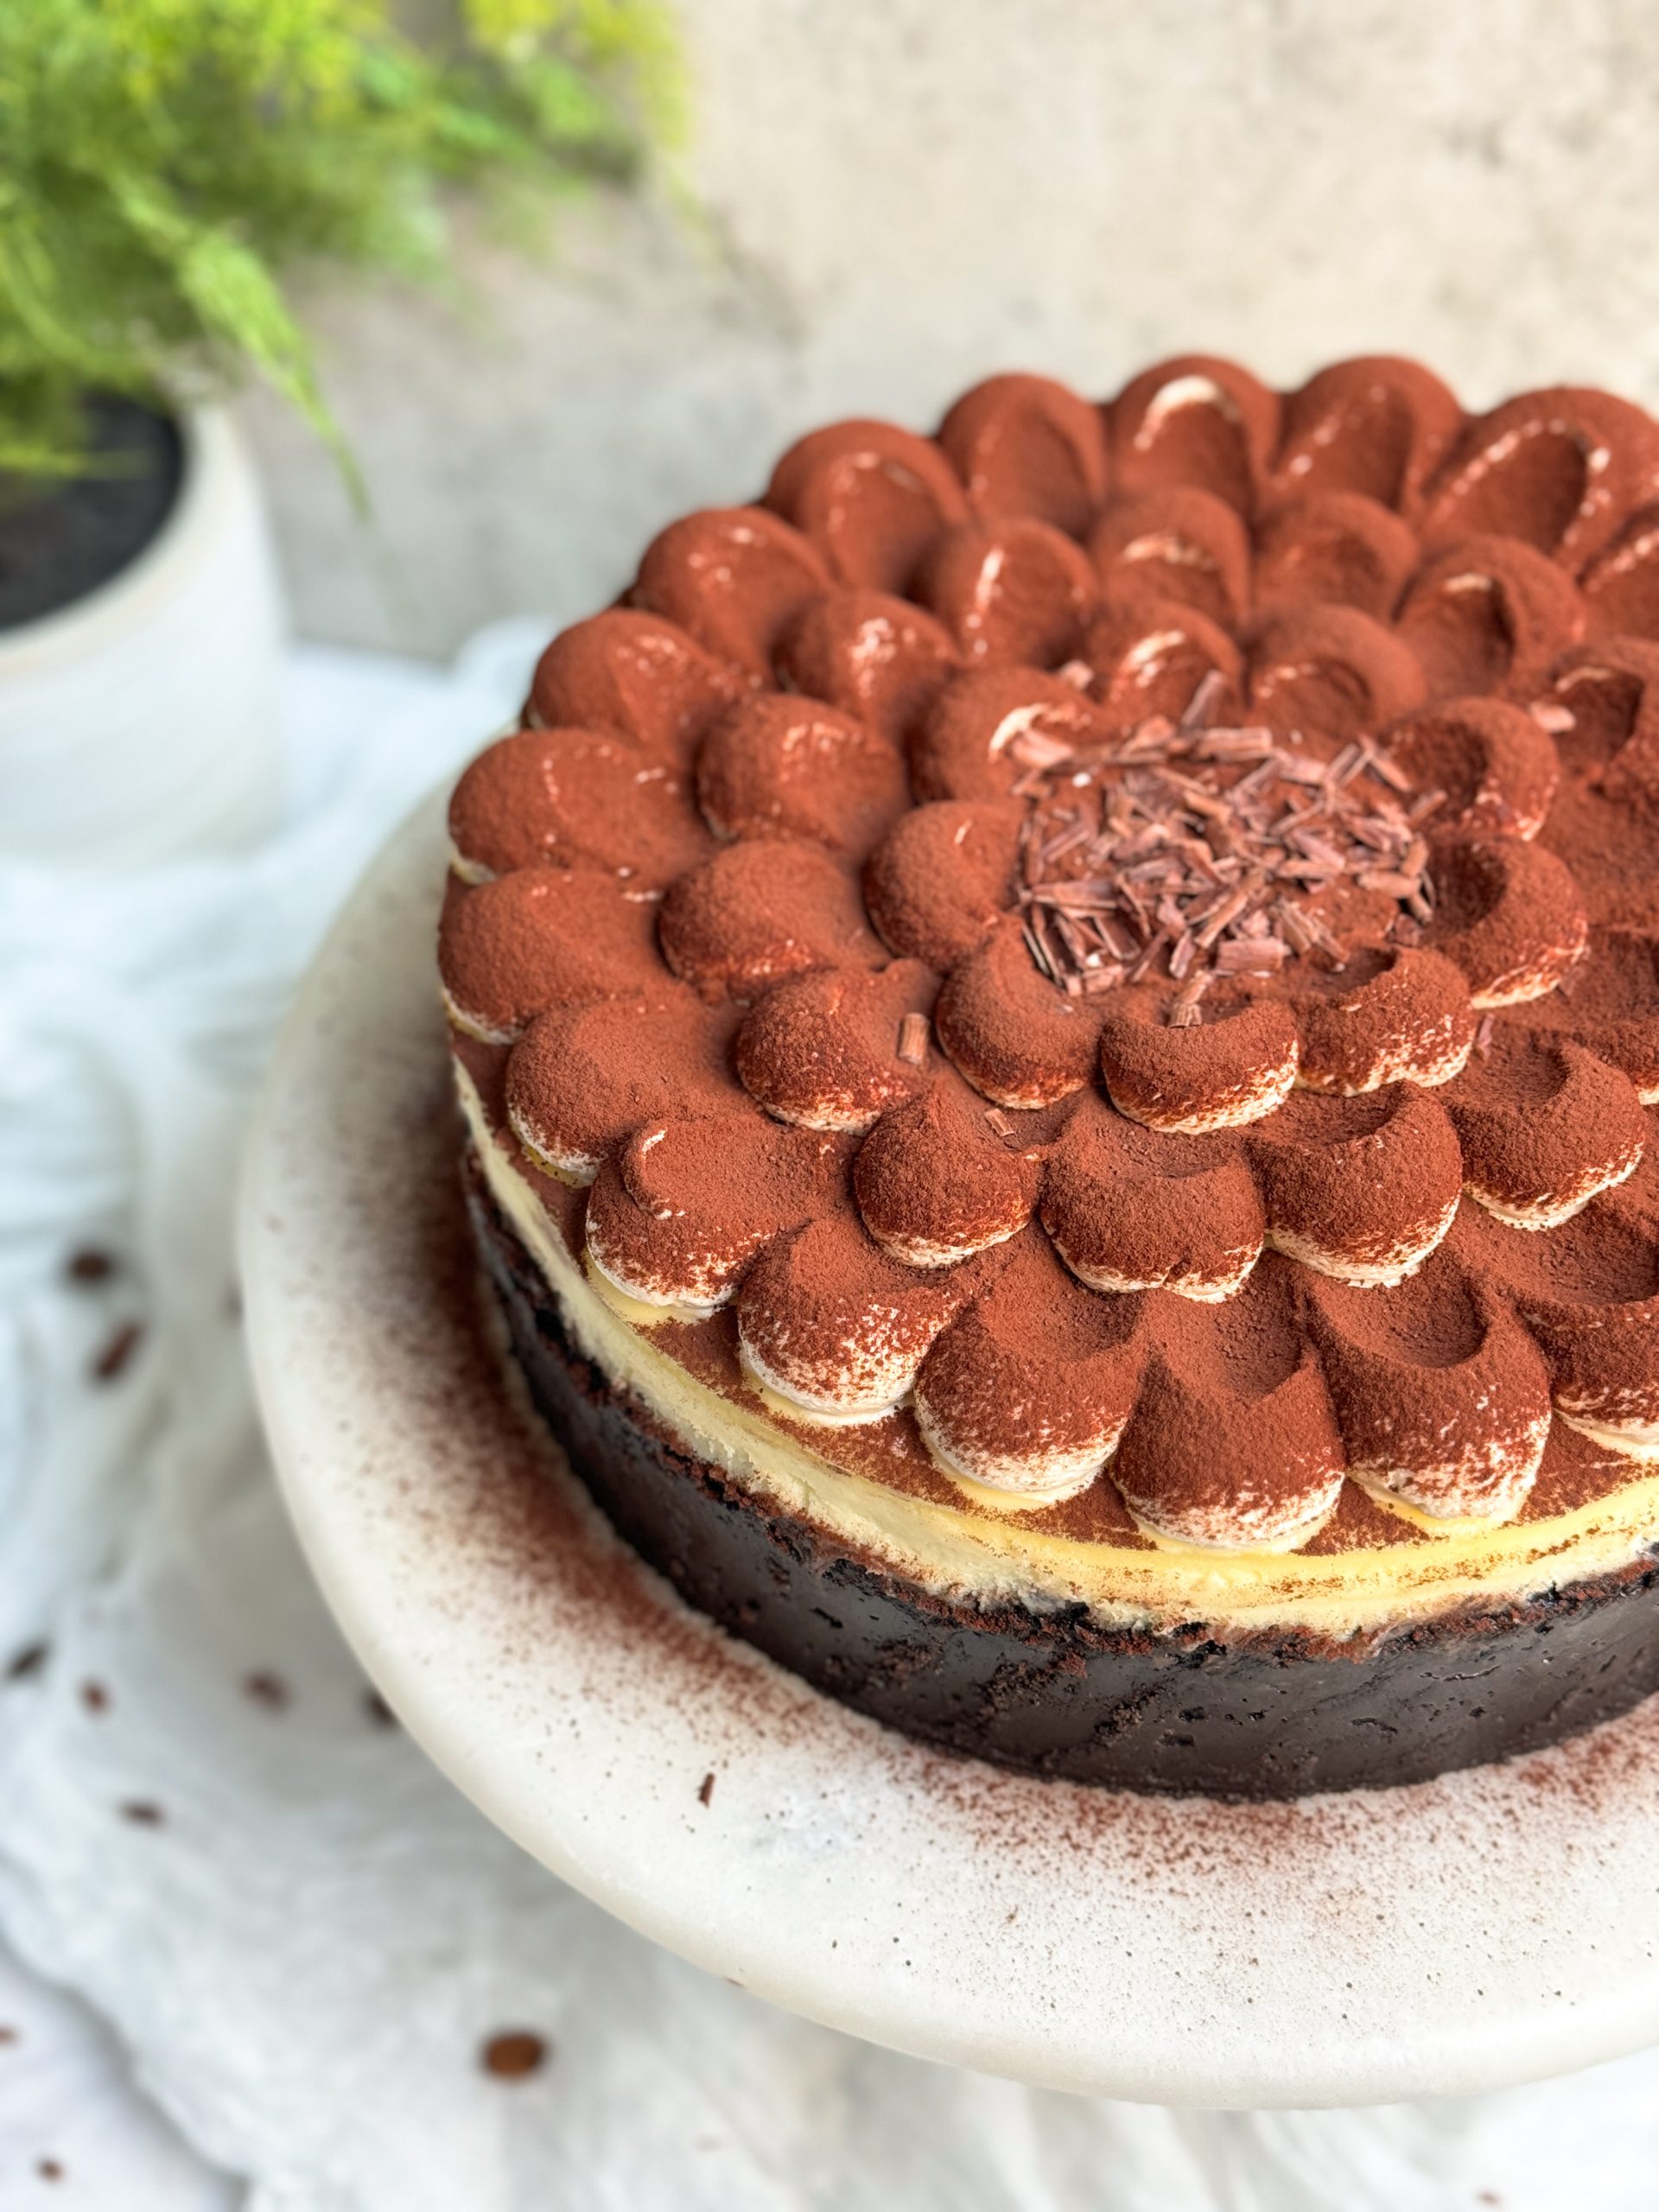 tiramisu cheesecake on a white marble cake stand. Cheesecake has a chocolate crust, a plain cheesecake filling, and is topped with dollops of mascarpone cream dusted with cocoa powder. Picture shows partial cheesecake